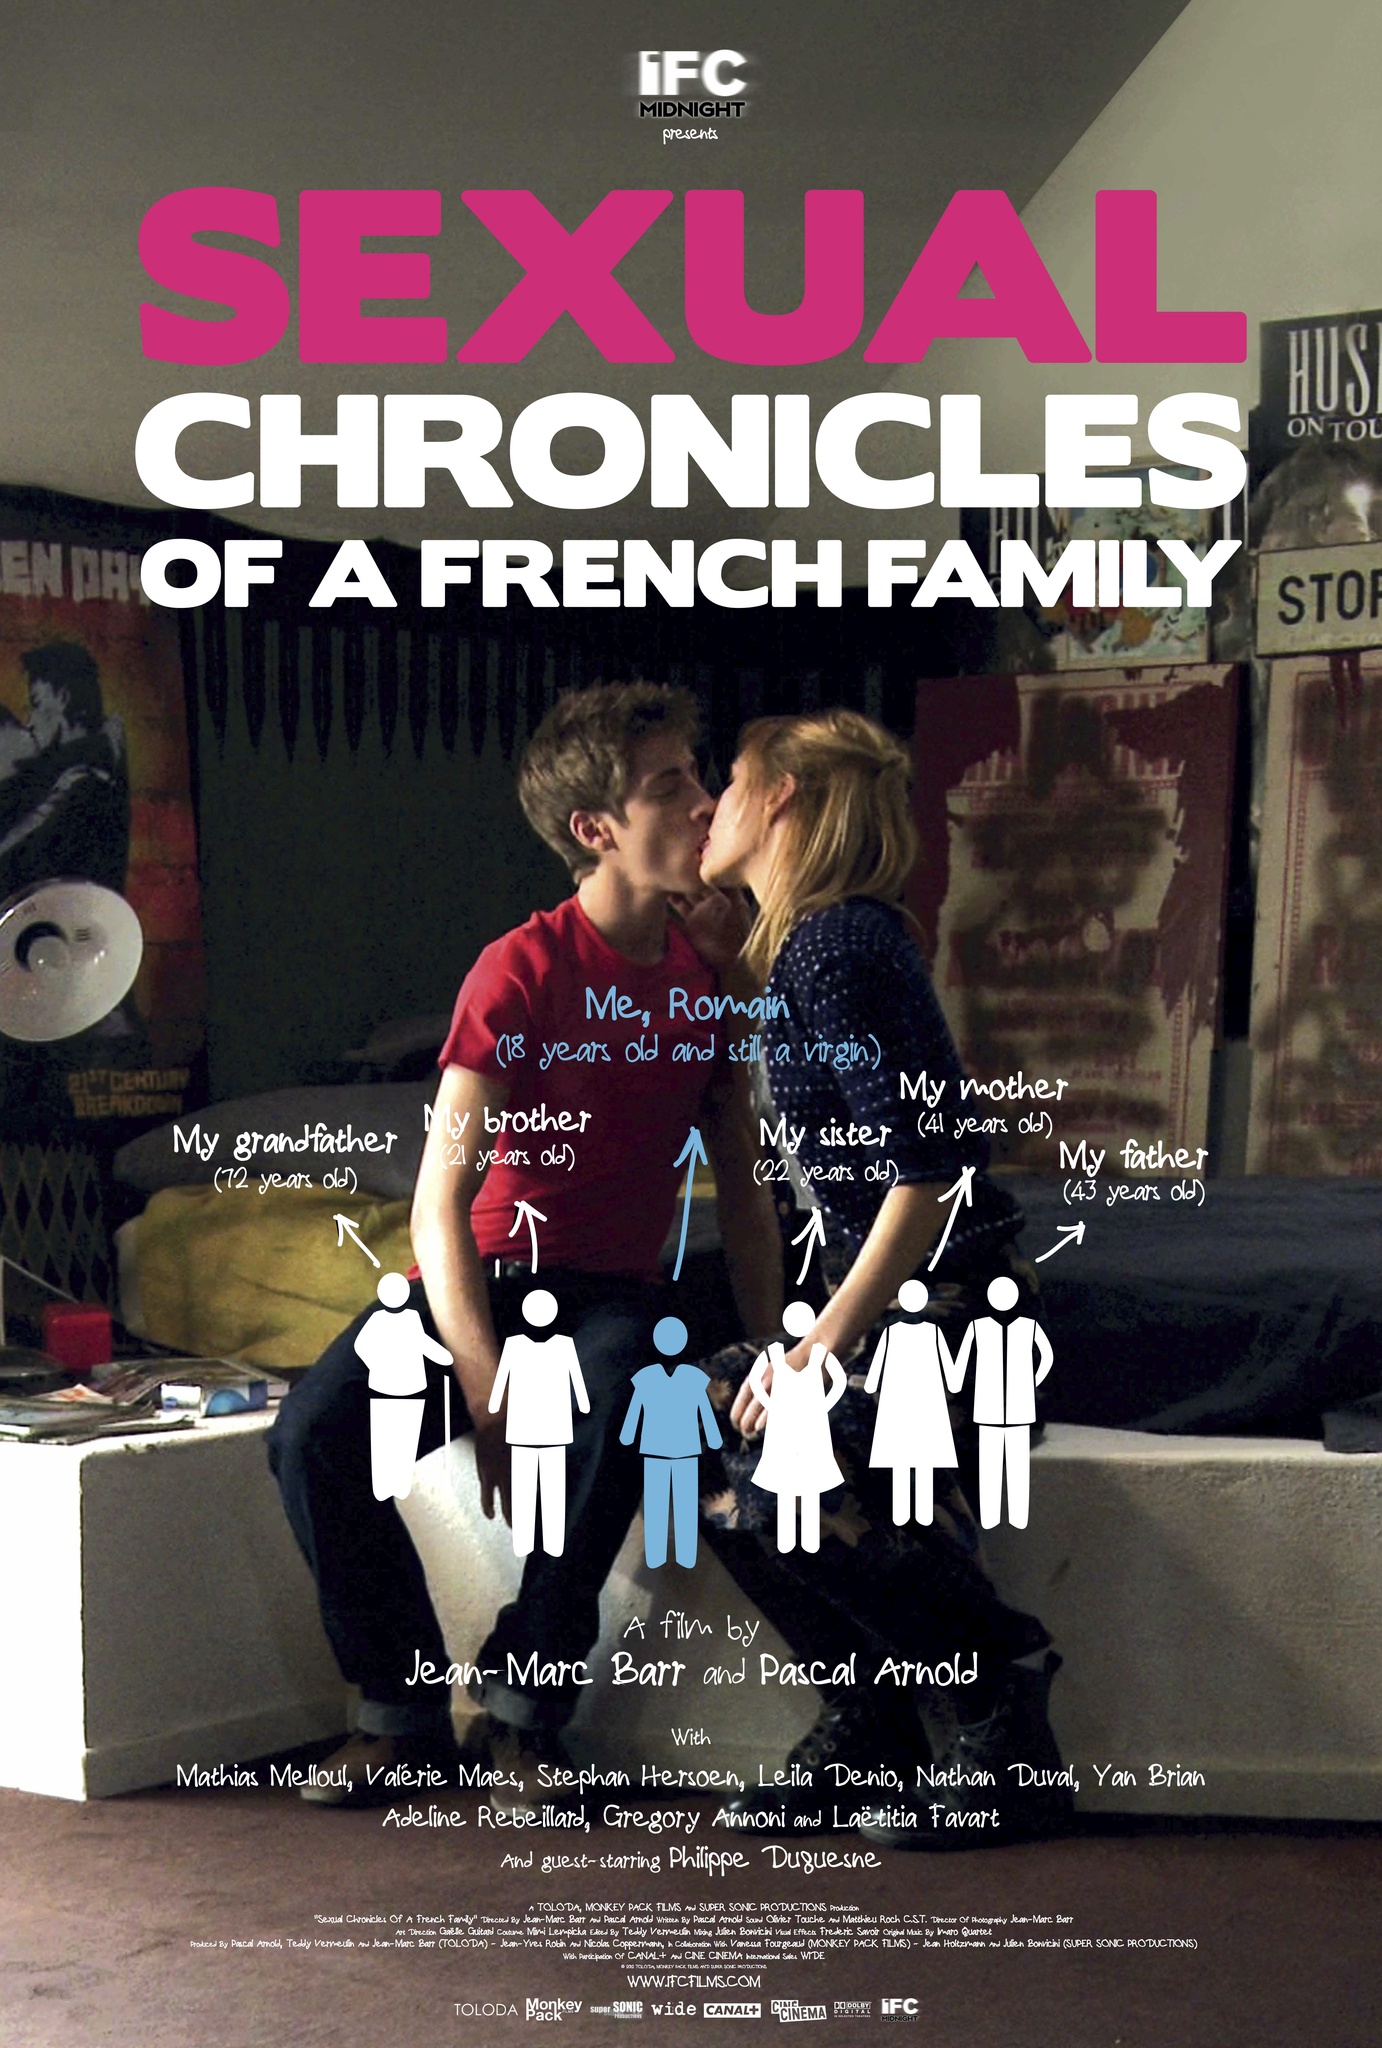 Sexual Chronicles of a French Family 2012 movie nude scenes